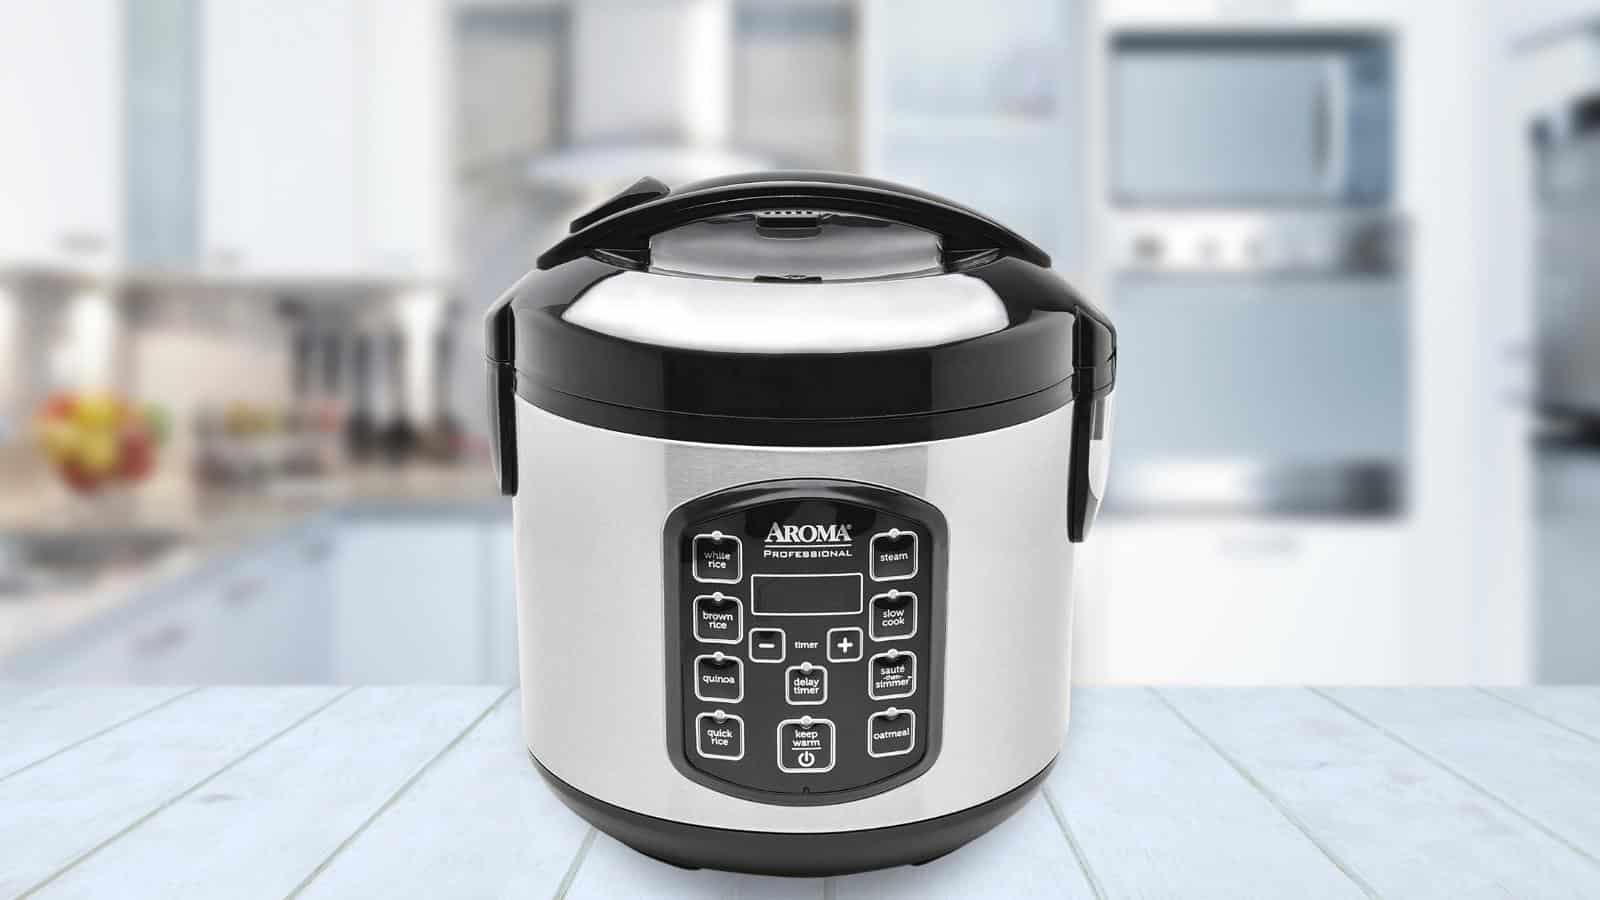 does-the-aroma-rice-cooker-stop-by-itself